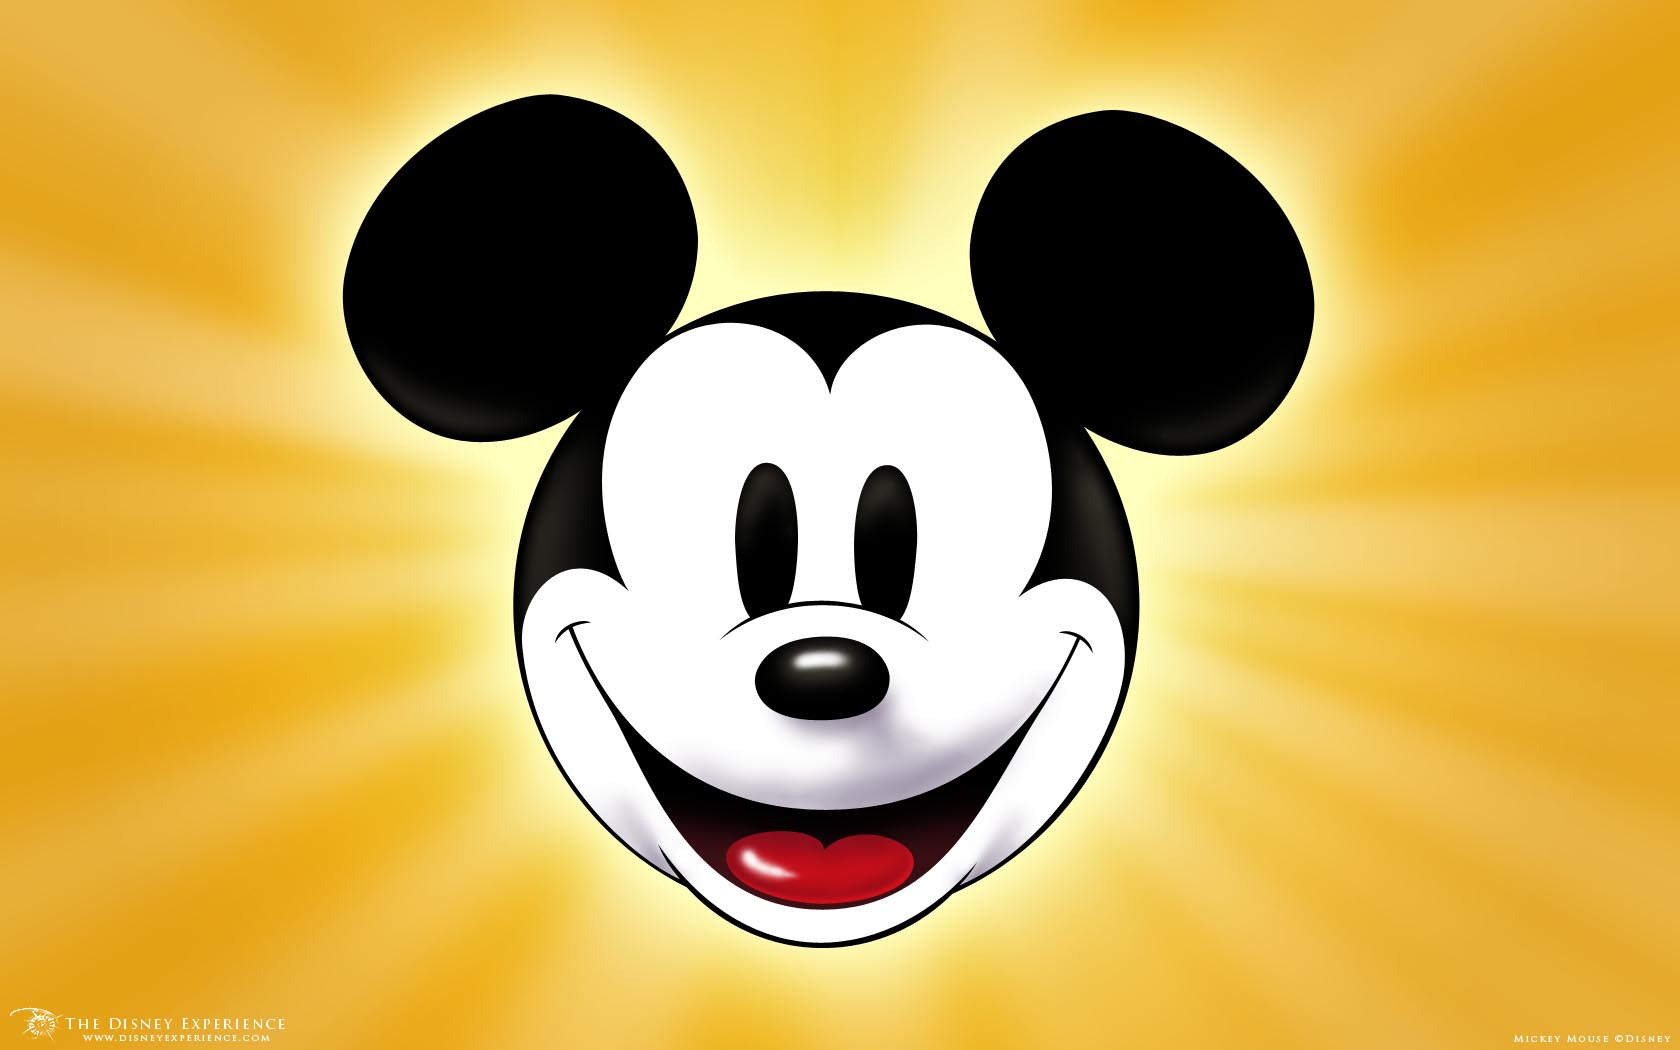 Mickey Mouse Wallpaper 770 Hd Wallpapers in Cartoons   Imagescicom